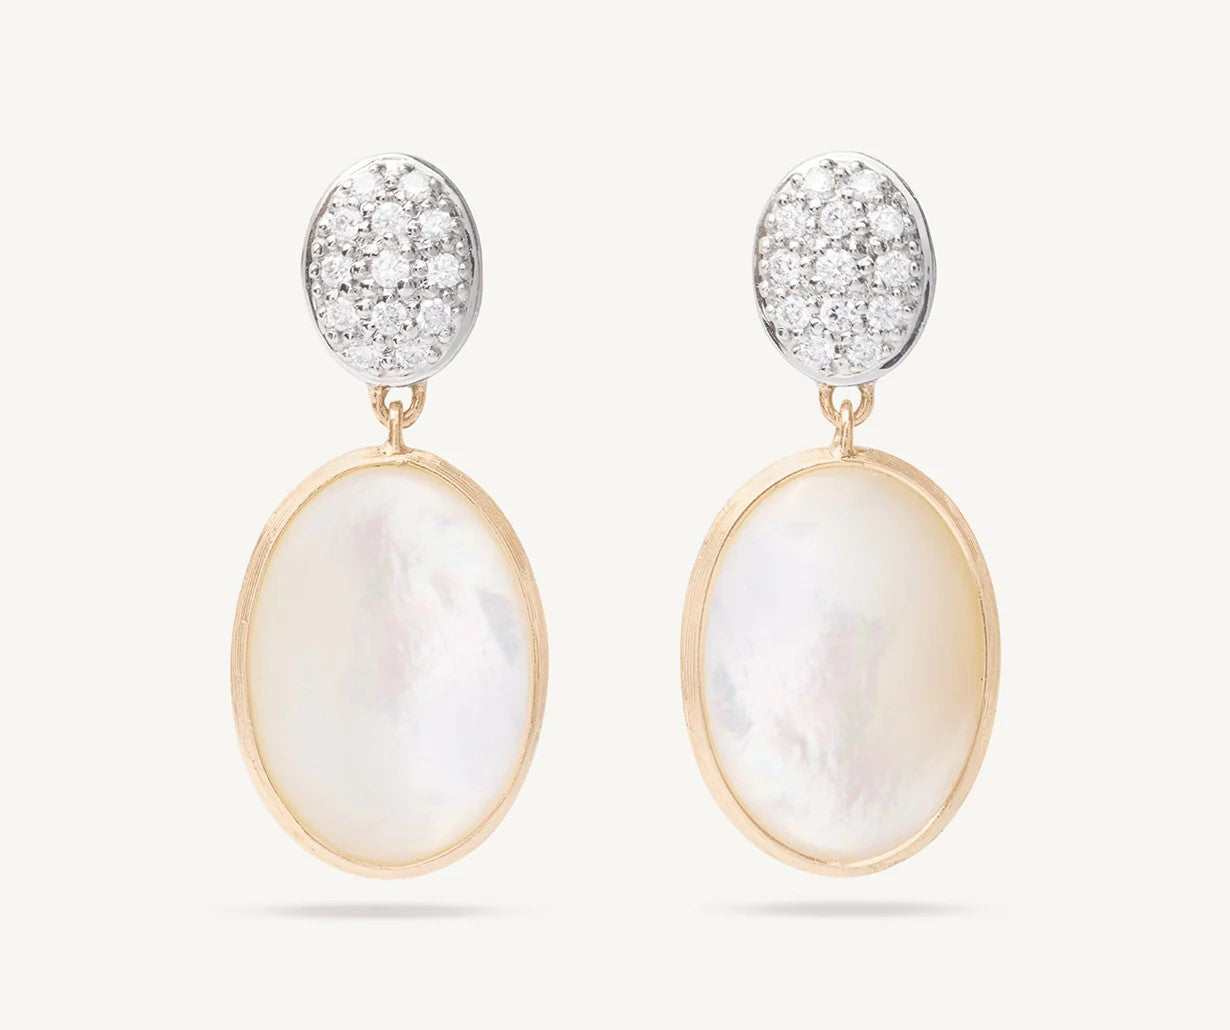 18K YELLOW GOLD MOTHER OF PEARL & DIAMOND DROP EARRINGS FROM THE SIVIGLIA COLLECTION